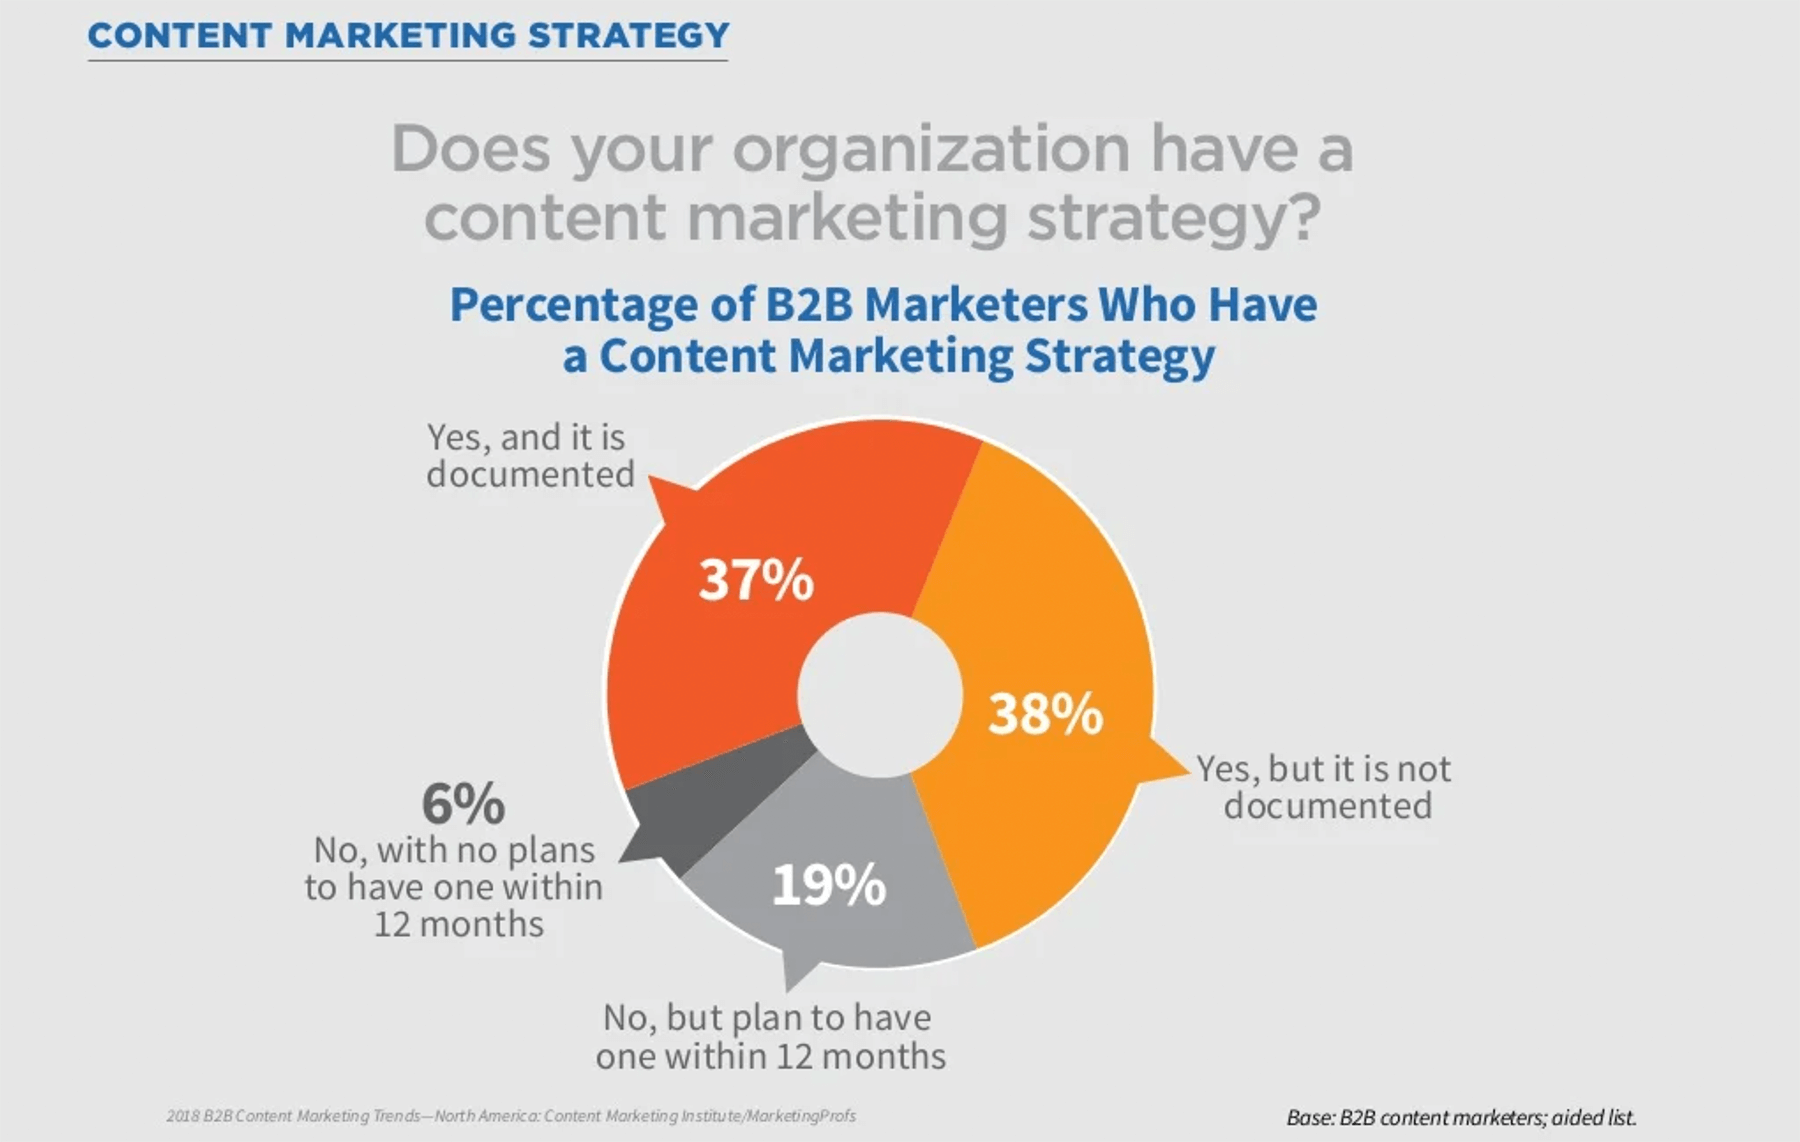 63% of businesses don’t have a documented content marketing strategy